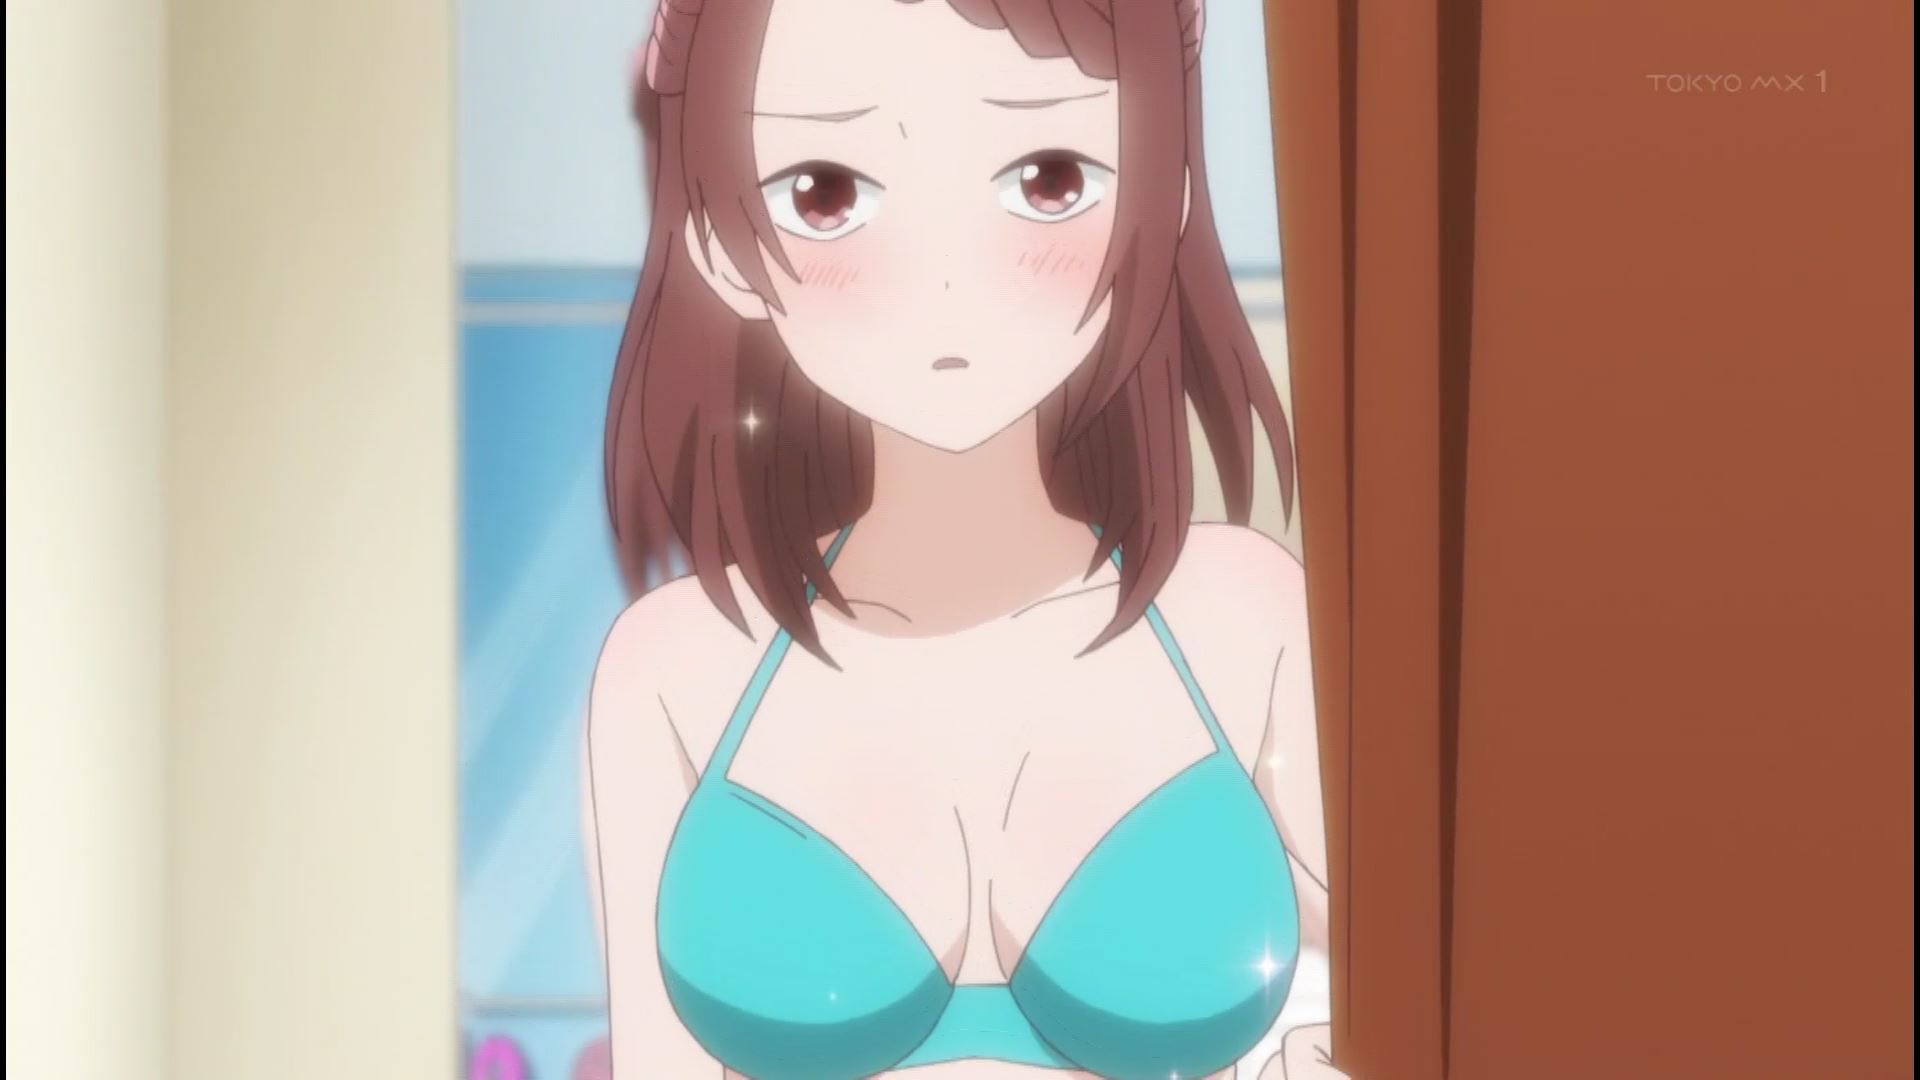 Anime [waste of high school girl] 8 episodes, such as erotic swimsuit and erotic dressing of girls 7